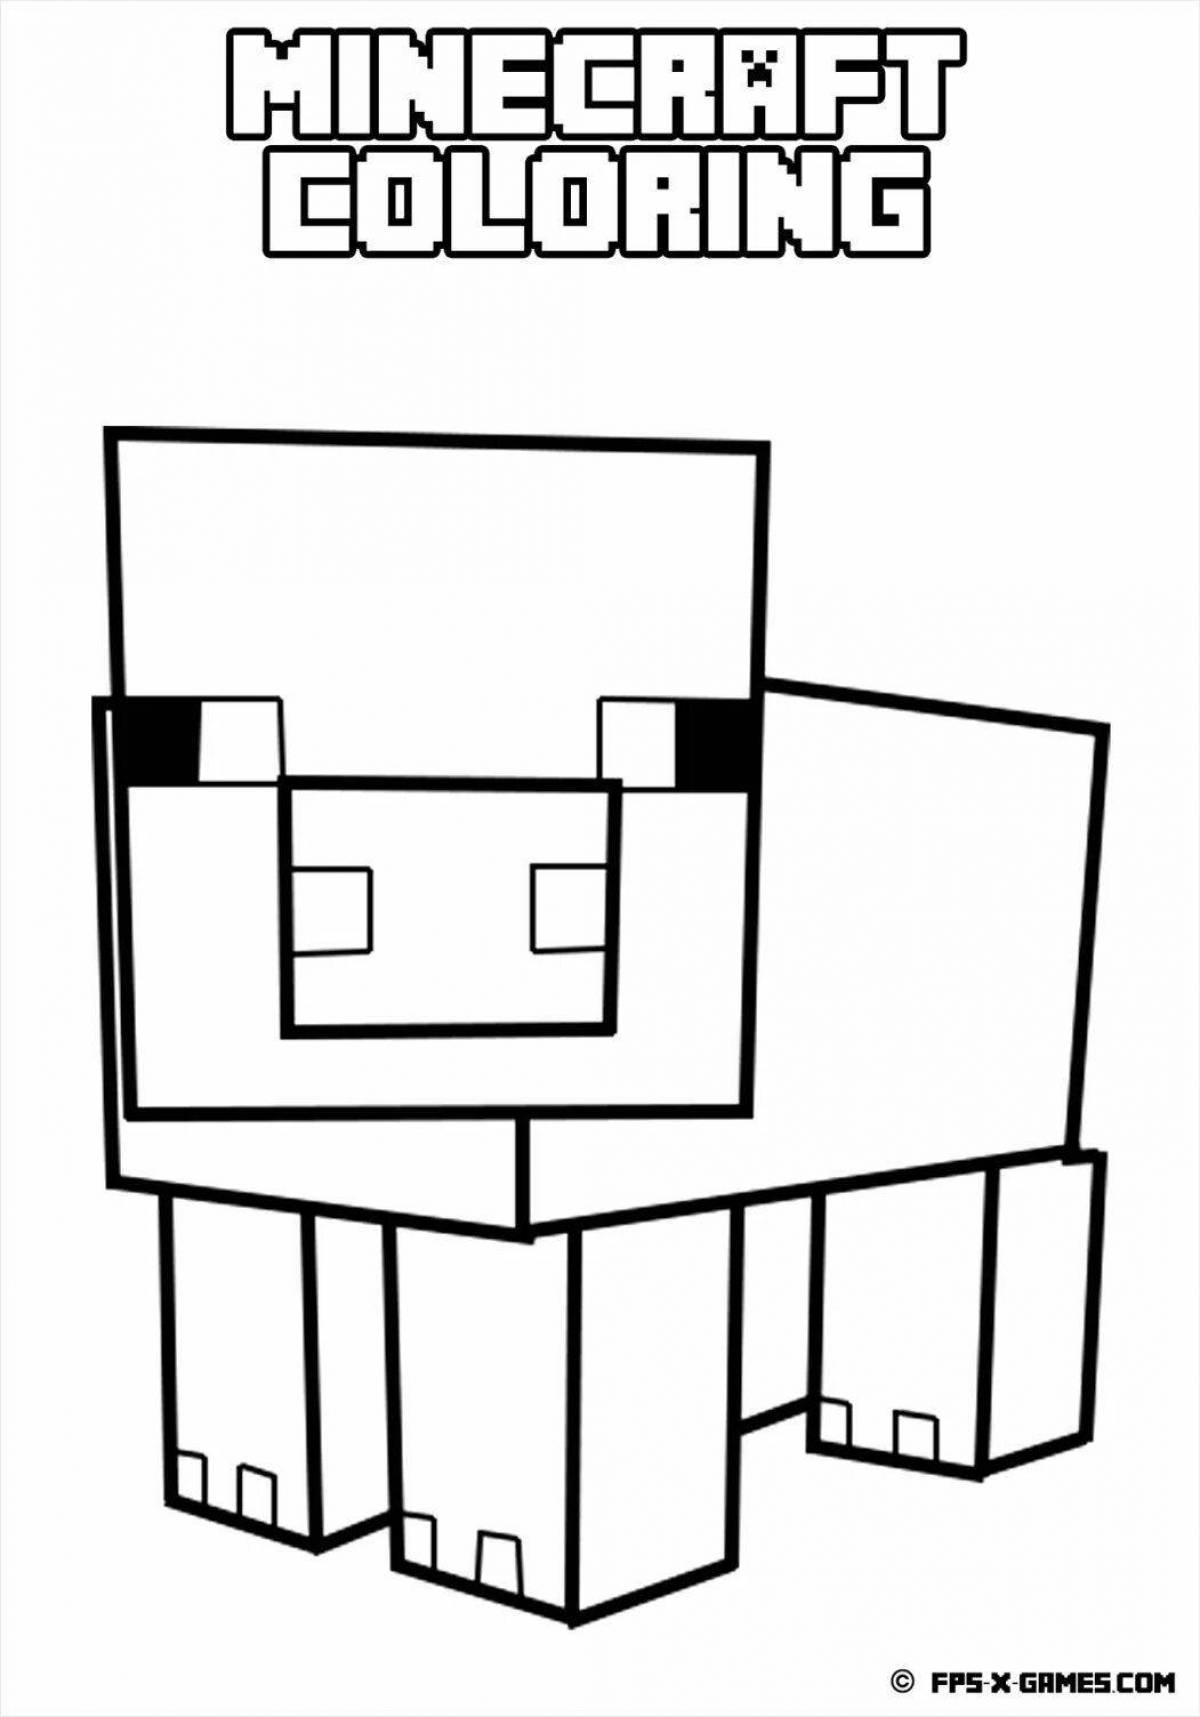 Sparkly minecraft icon coloring page